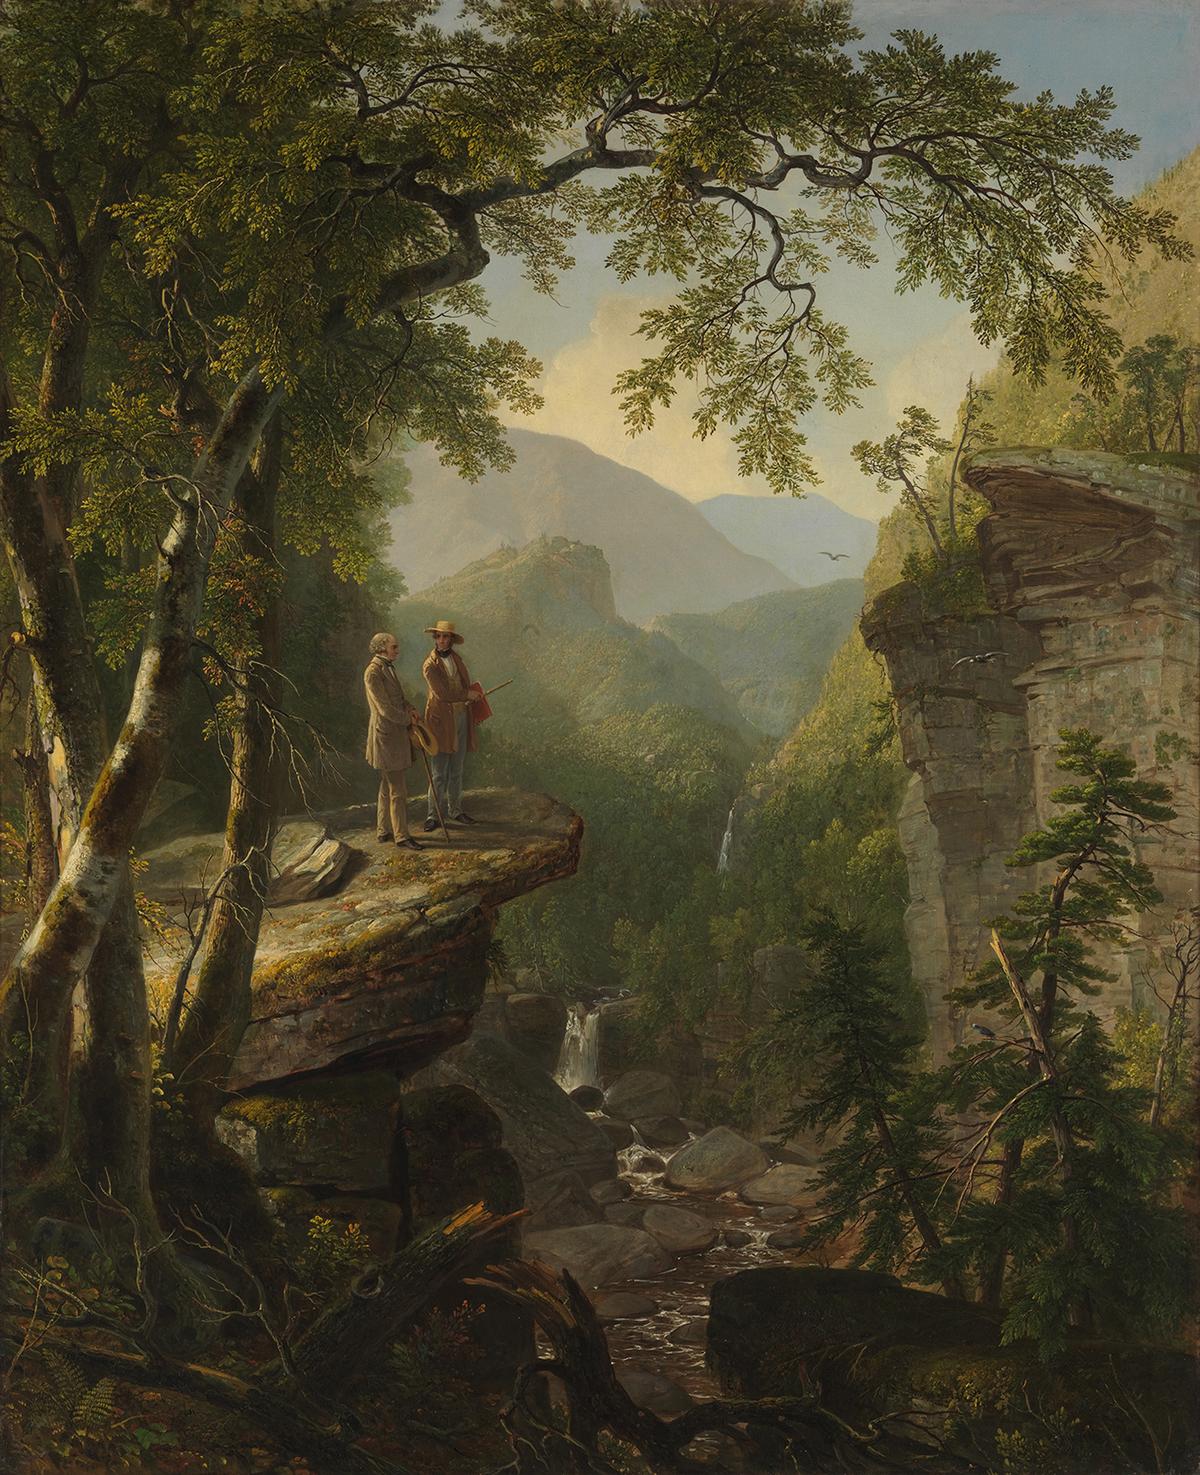 Friends Thomas Cole and William Cullen Bryant reminisce in the sweeping landscape of the Hudson River Valley. “Kindred Spirits,” 1849, by Asher Brown Durand. Oil on canvas; 46 inches by 36.2 inches. Crystal Bridges Museum of American Art, Arkansas. (Public Domain)